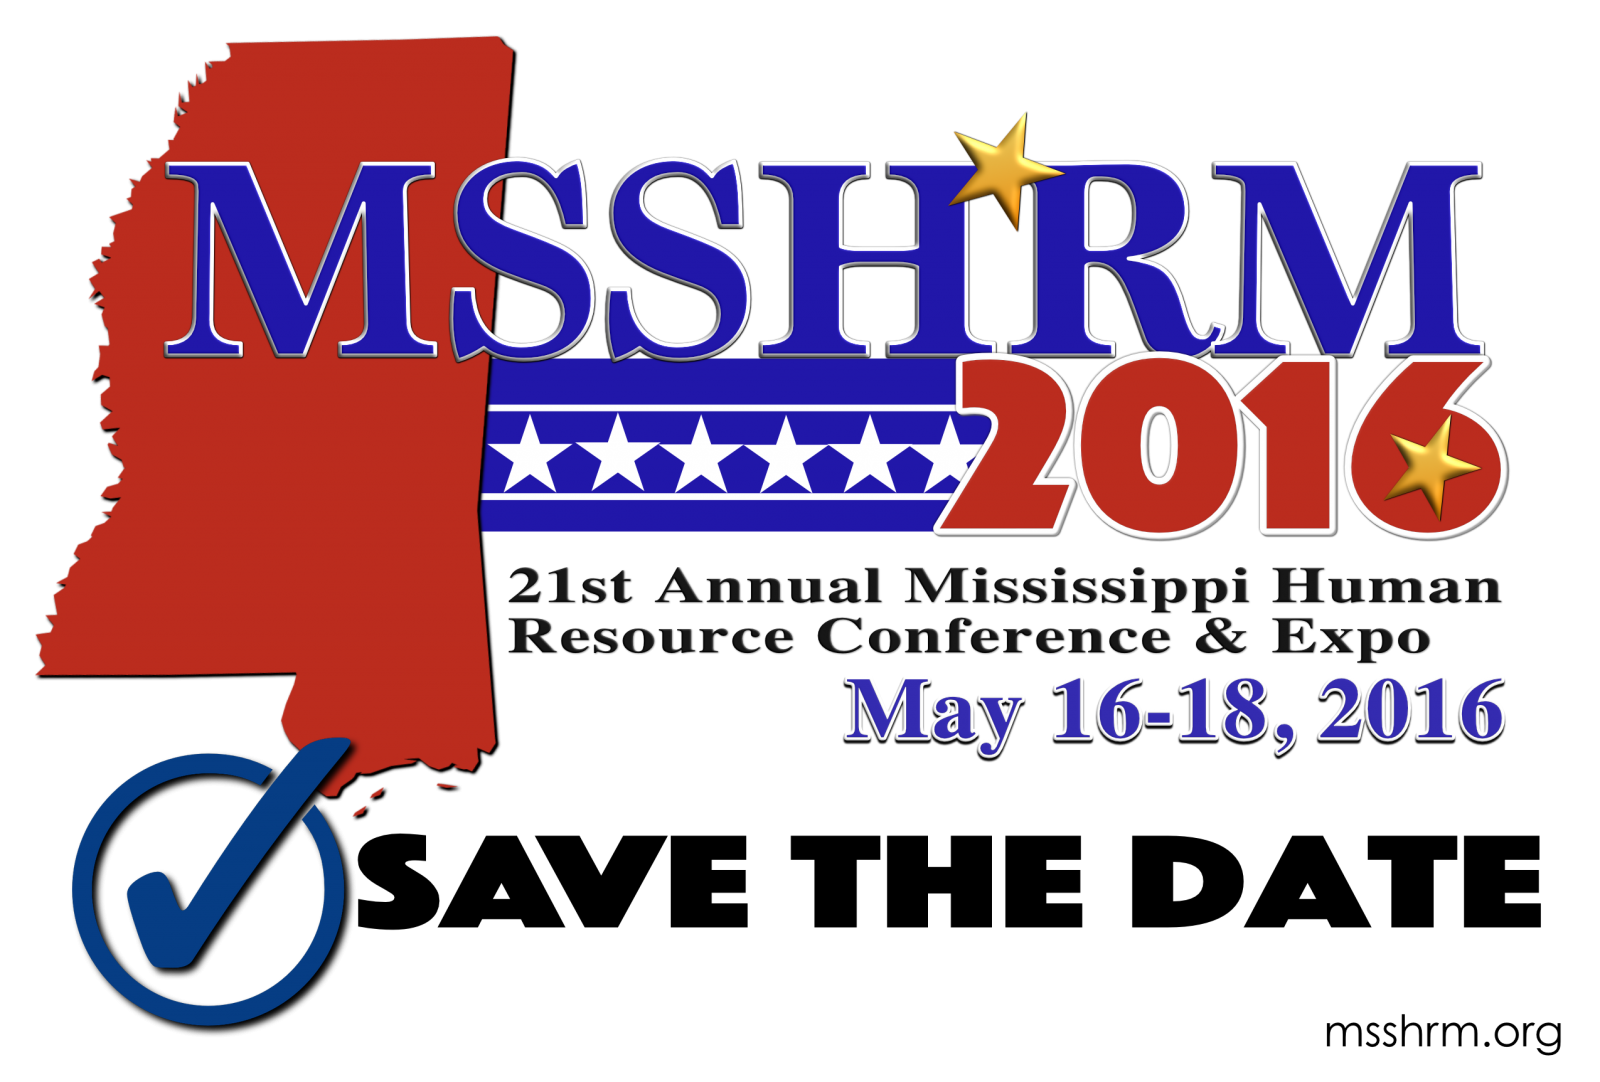 Mississippi SHRM 2016 Conference & Expo